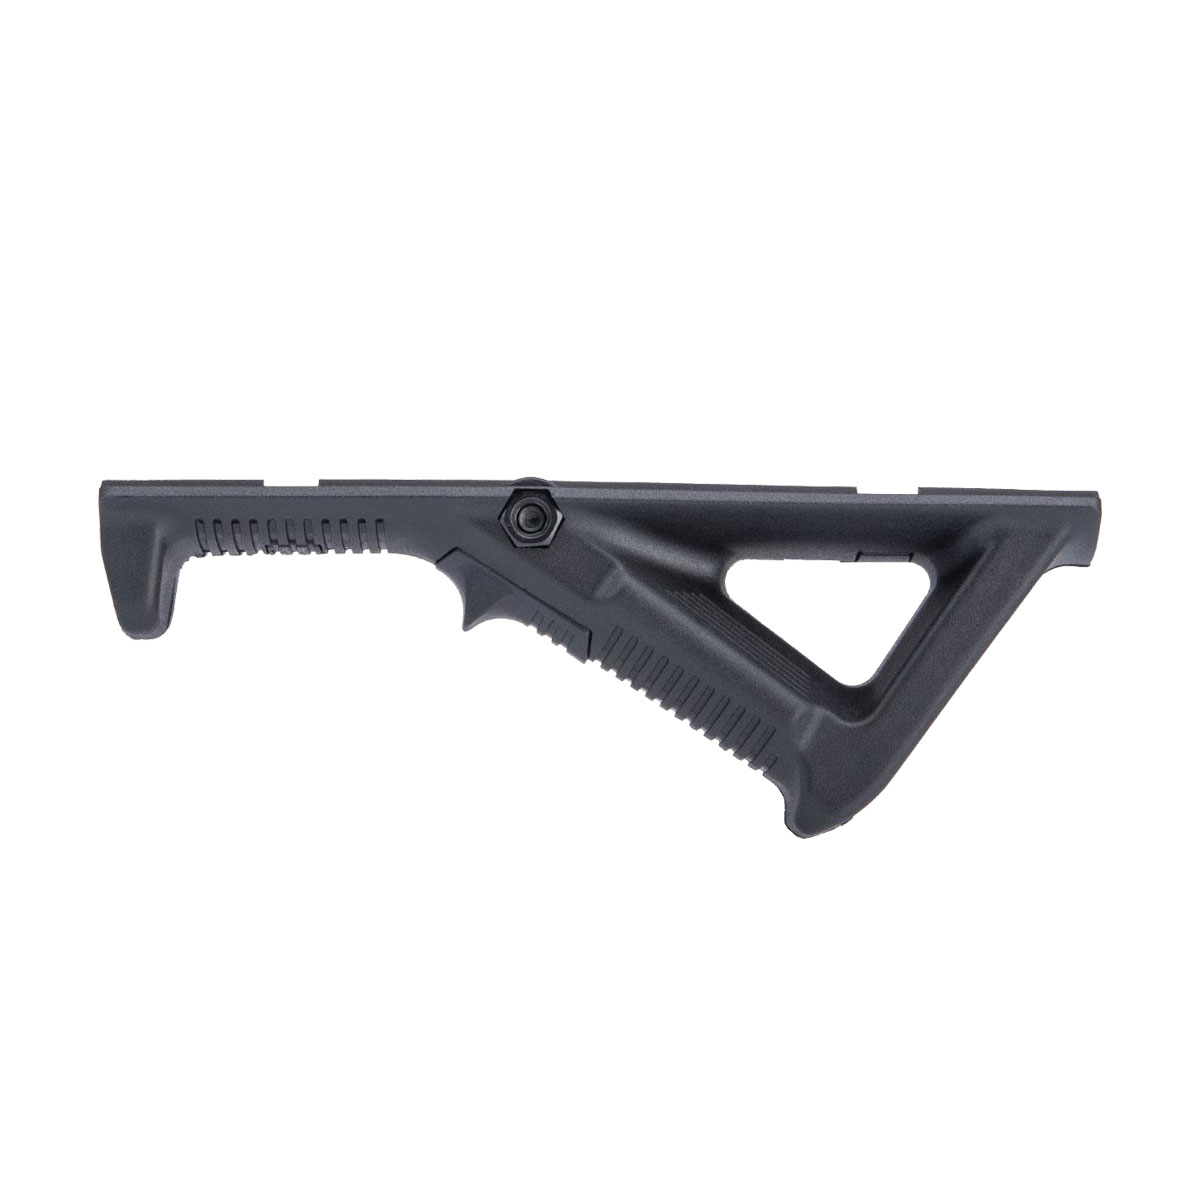 Gauntlet Arms USA-Made Polymer Angled Foregrip